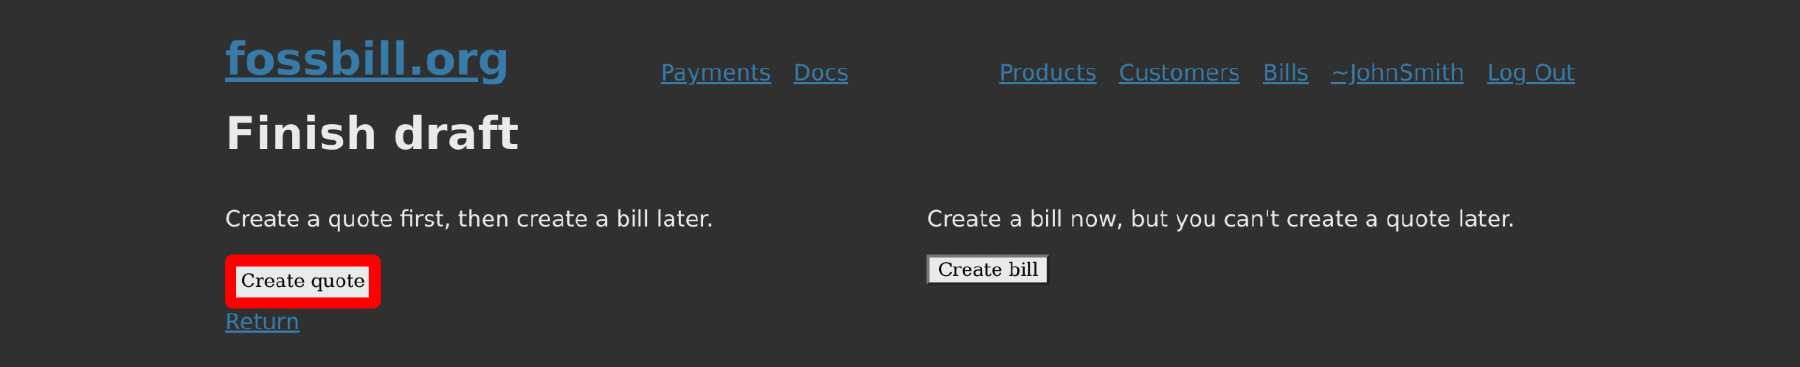 Bill finishing page - We can also skip the quote step